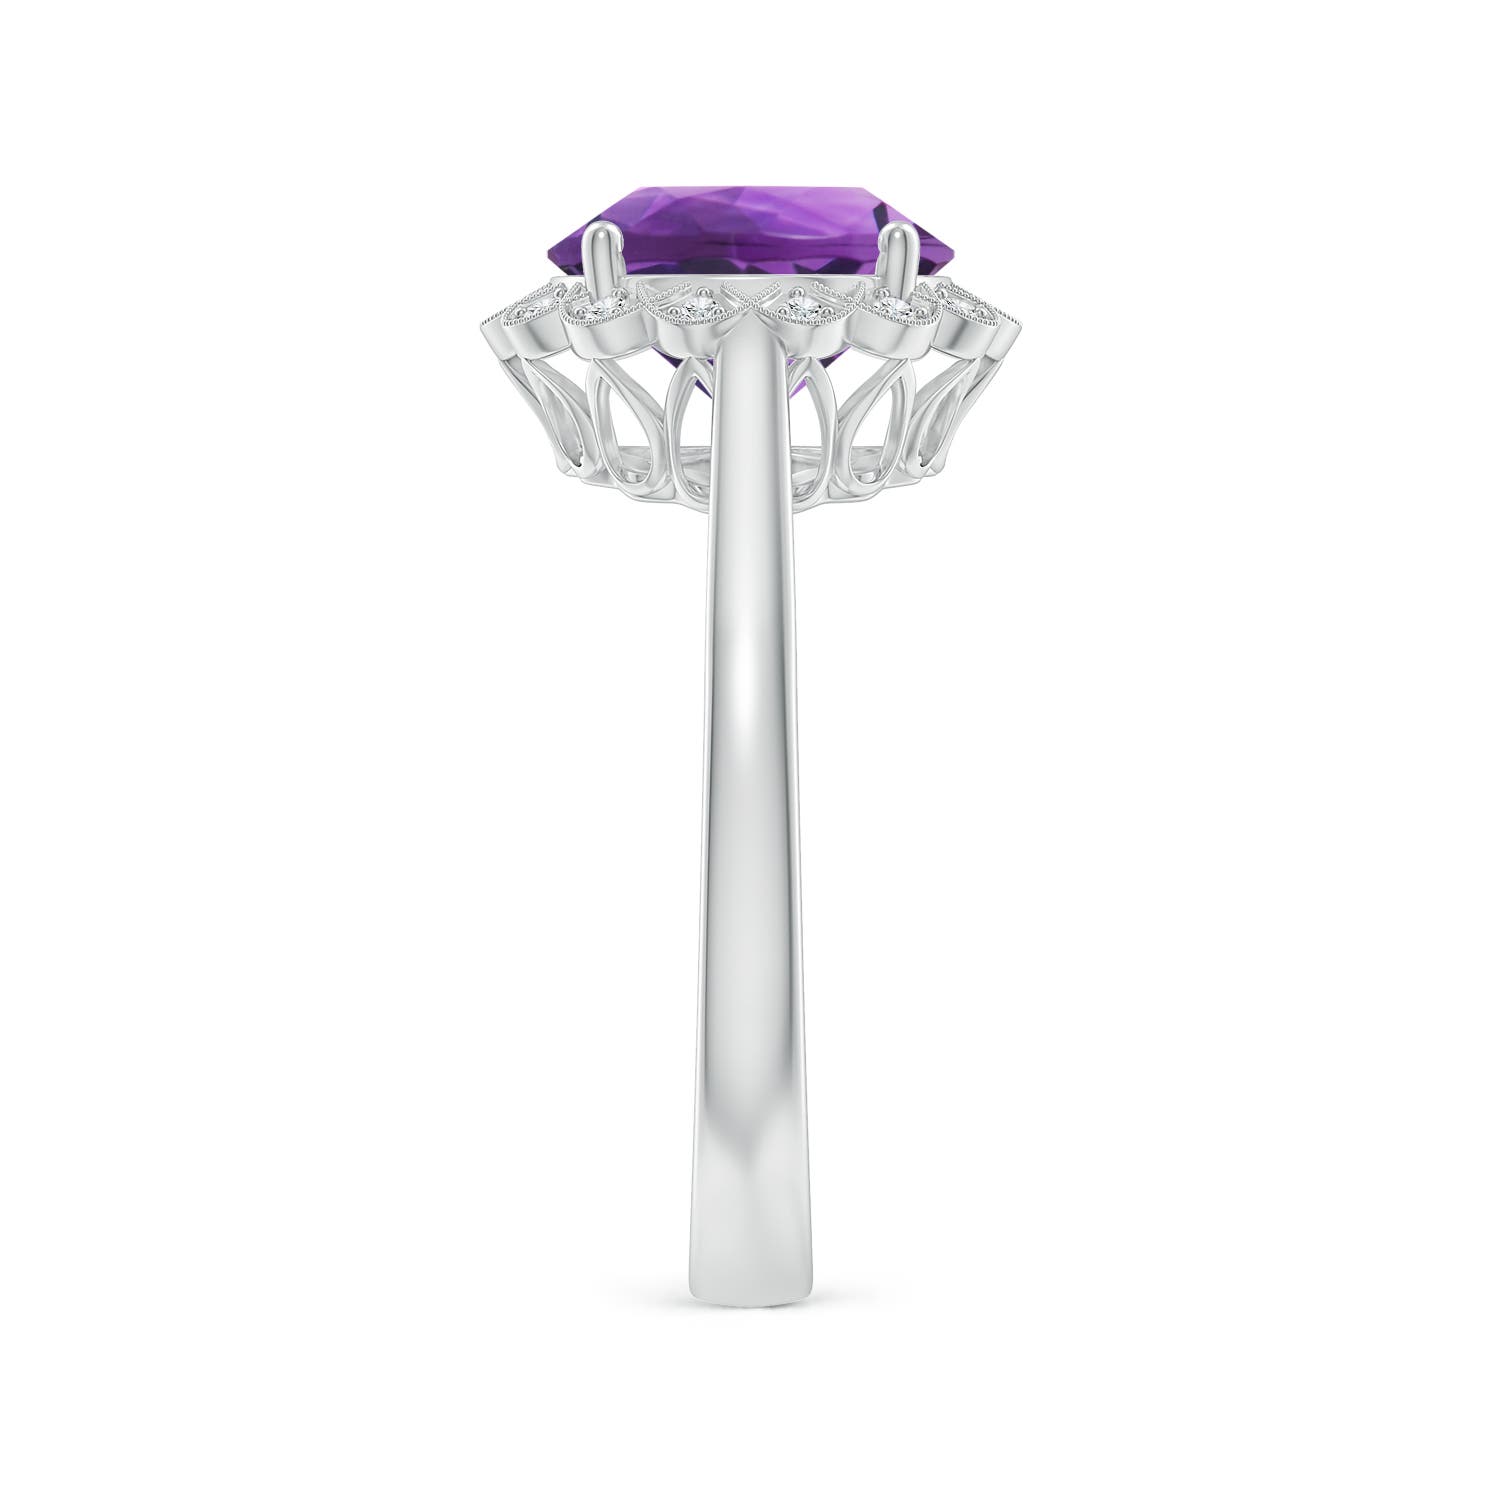 AAA- Amethyst / 2.52 CT / 14 KT White Gold